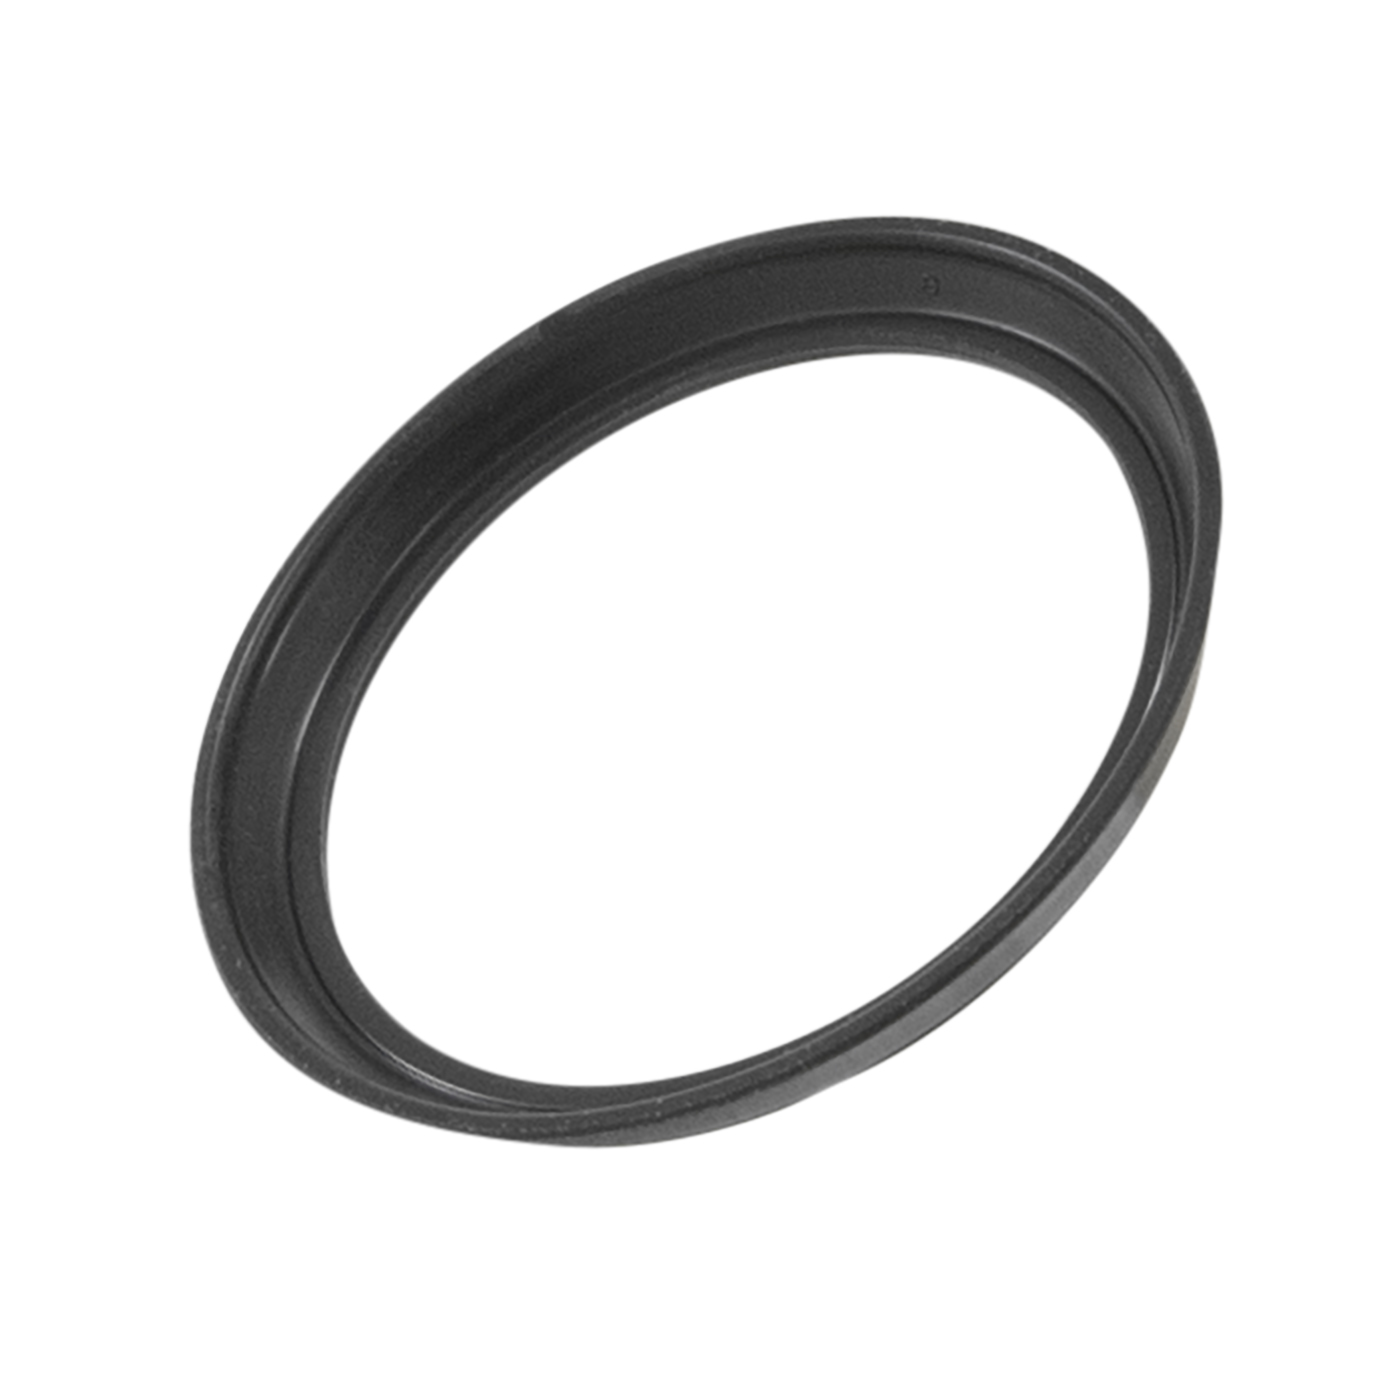 Replacement upper king-pin seal for 80-93 GM Dana 60 